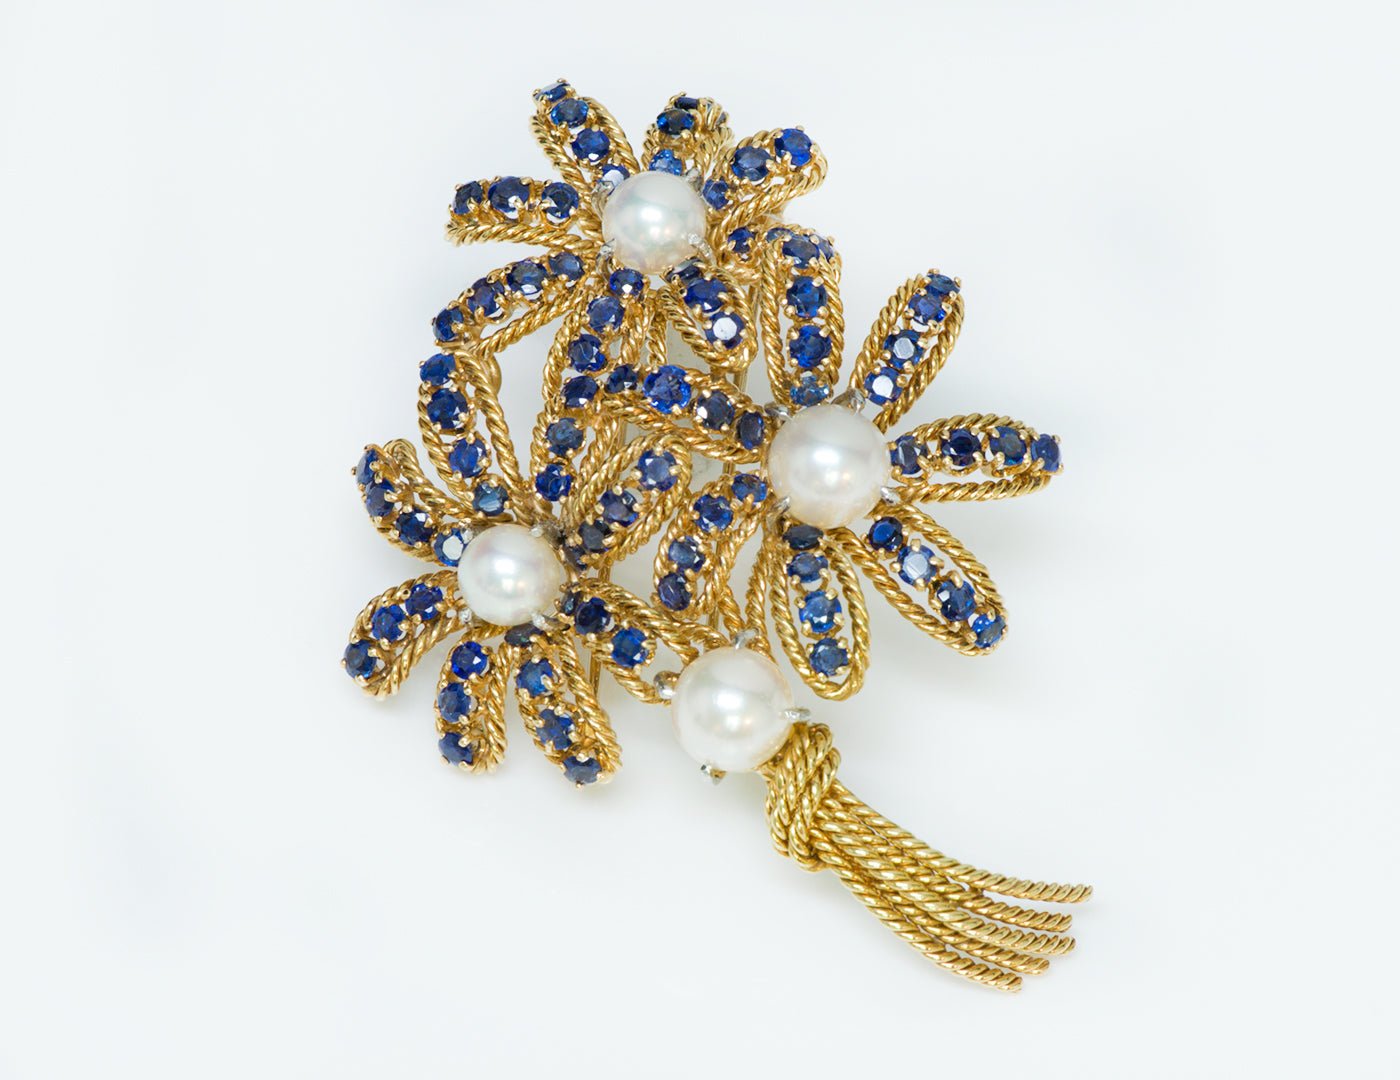 Van Cleef and Arpels: a Marker of High Jewelry Excellence - DSF Antique Jewelry